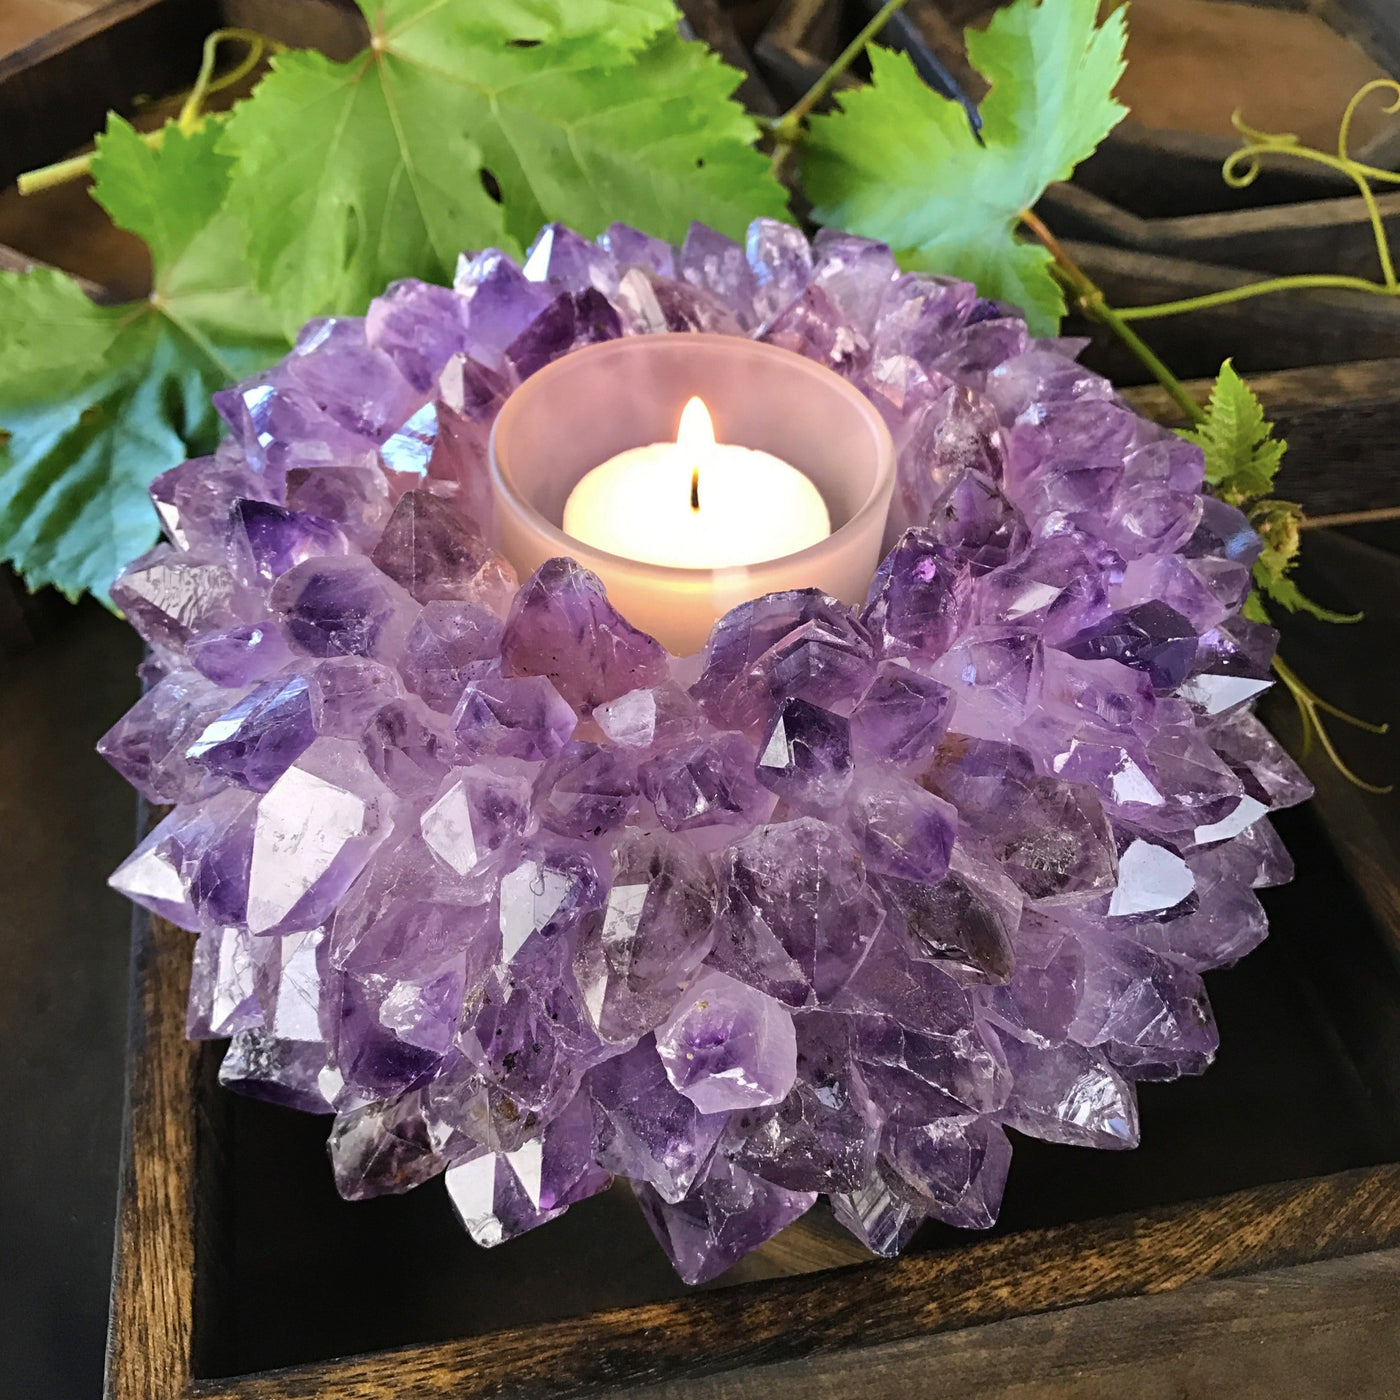 large amethyst point candle holder with candle burning inside of it